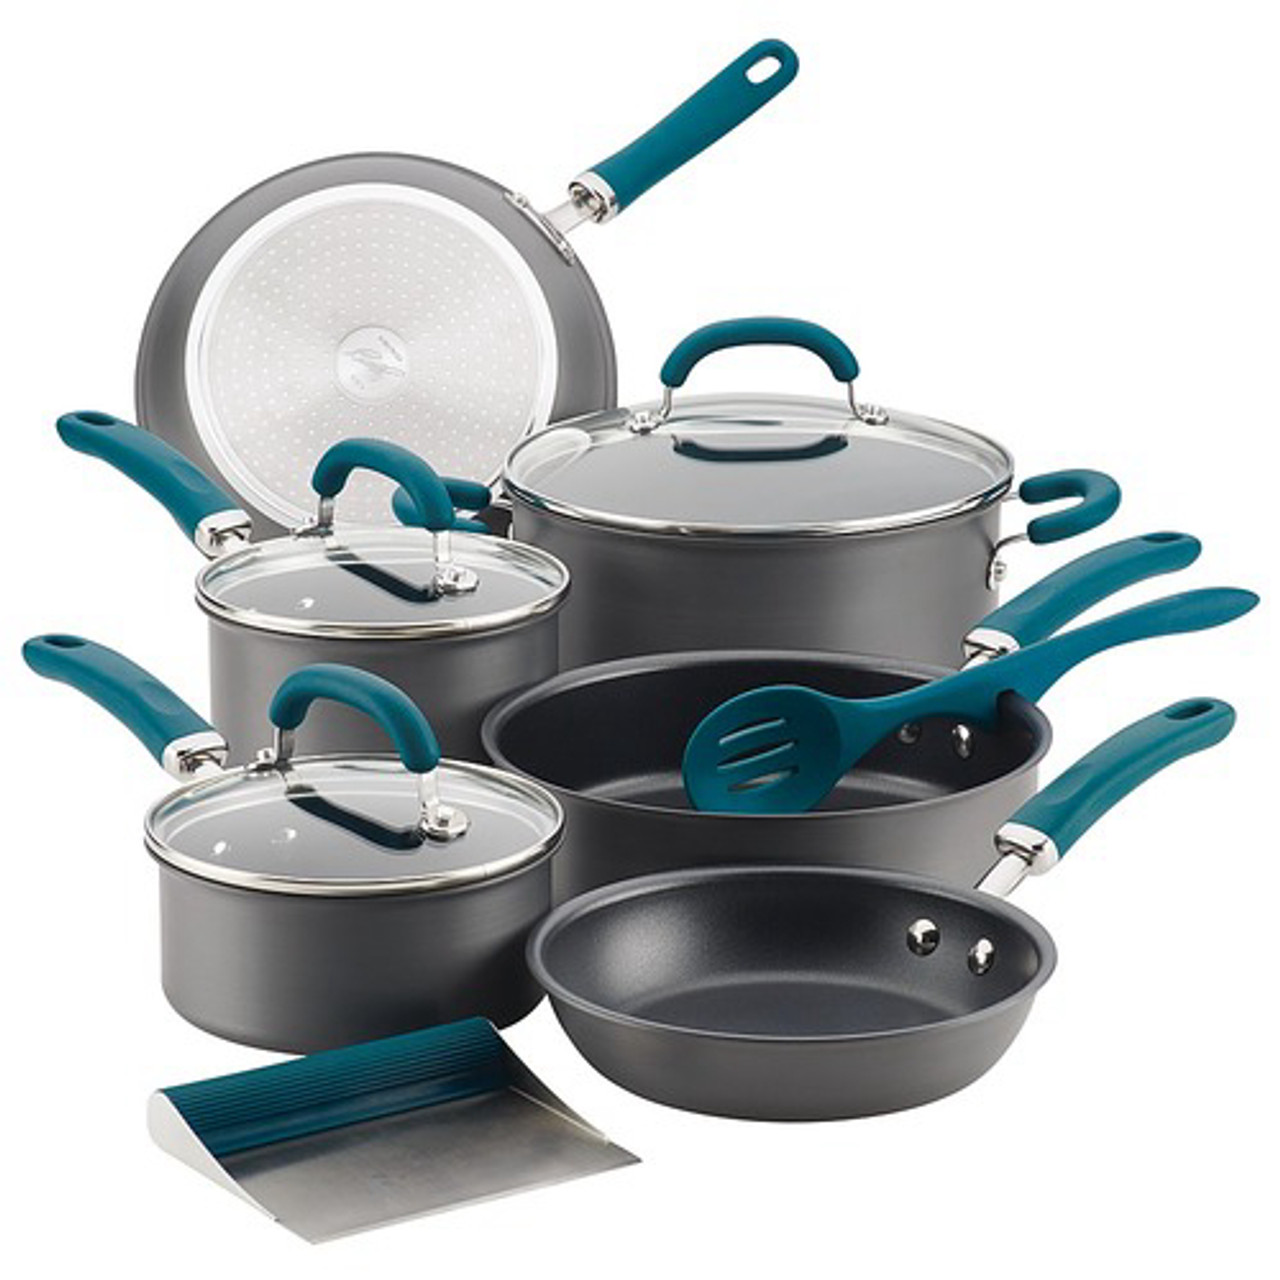 Rachael Ray Create Delicious Hard-Anodized Aluminum Nonstick Cookware Set, 11-Piece, Teal Handles - Gray with Teal Handles